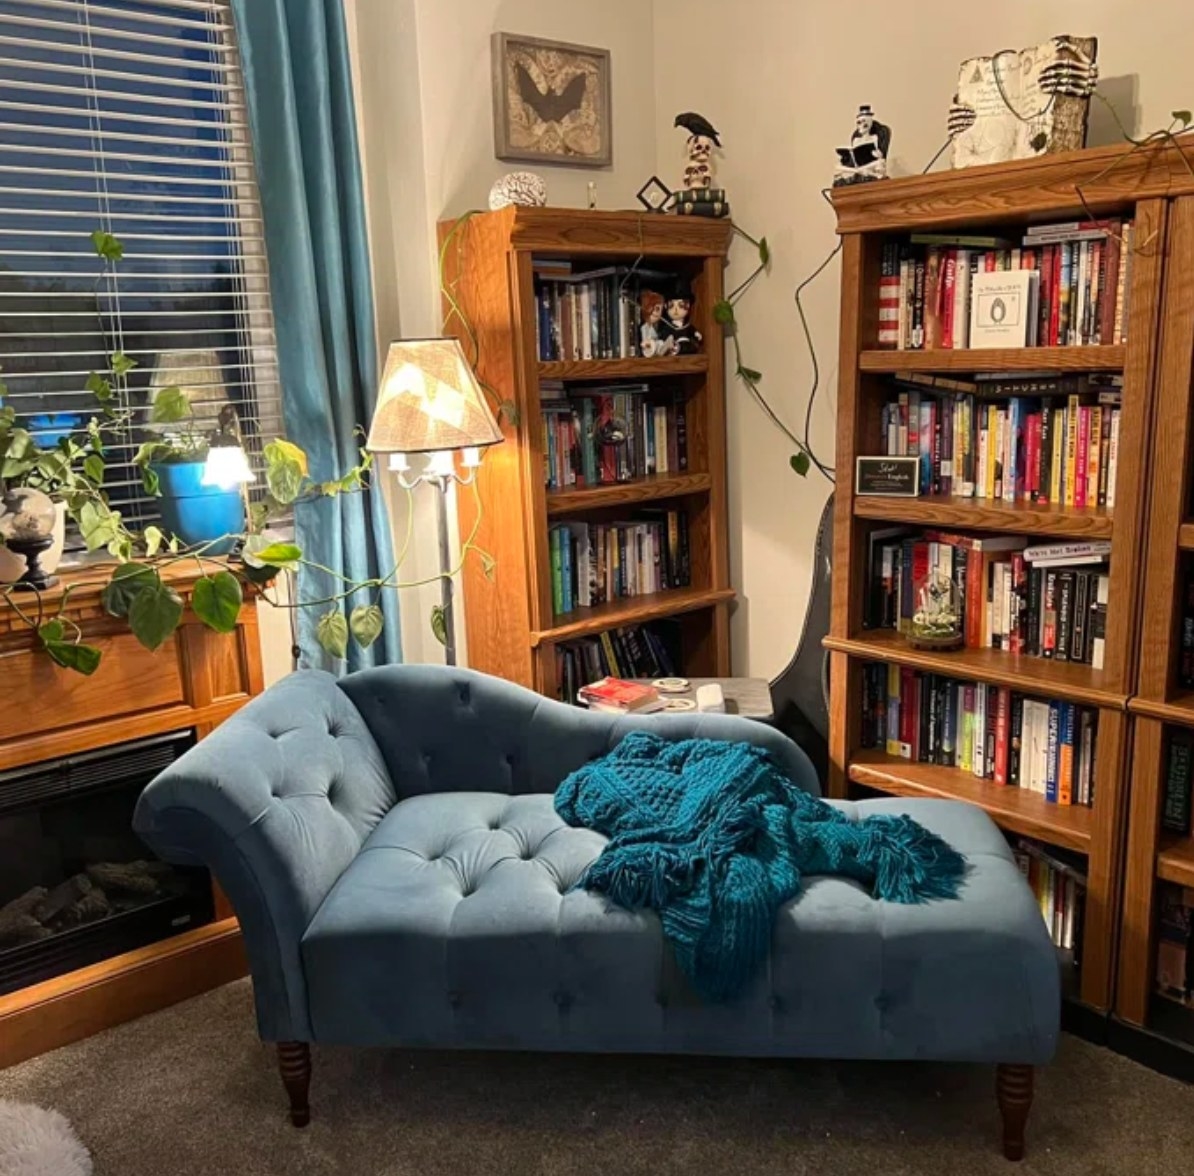 a blue chaise in a study with bookshelves, a fire place, plants, a floor lamp, and other decor